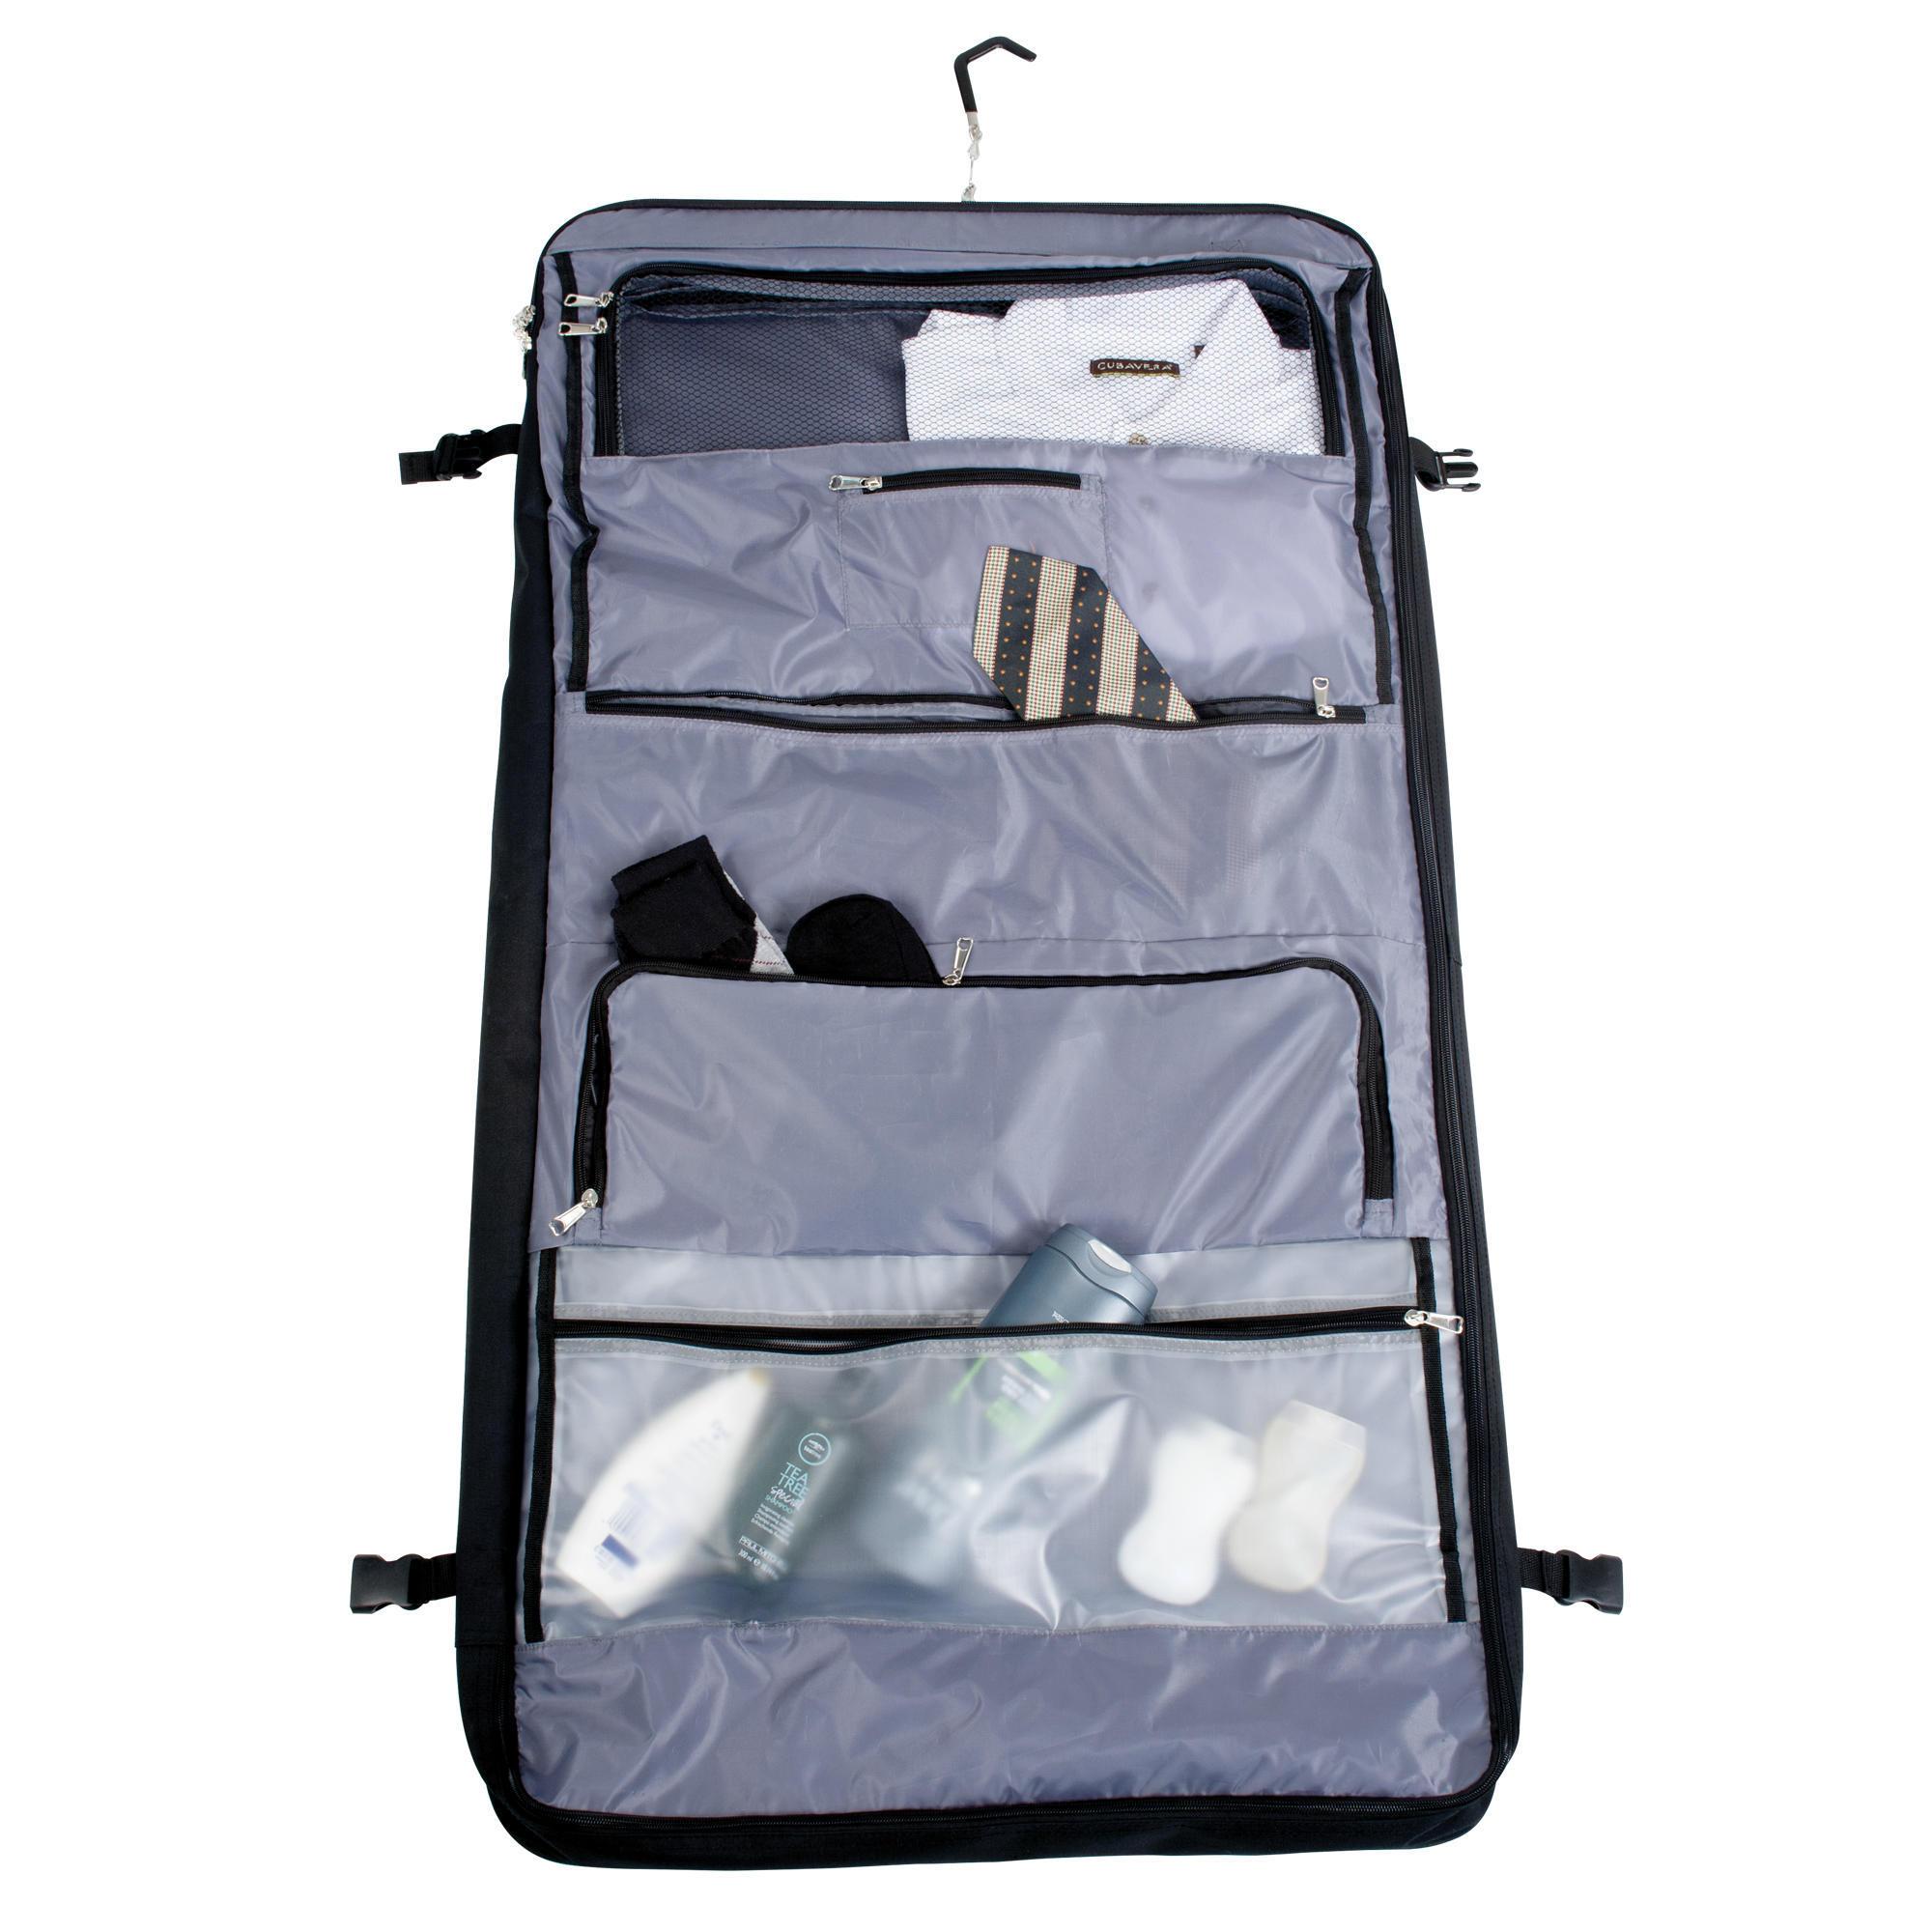 Delsey Helium 45" Deluxe Garment Bag – Luggage Pros